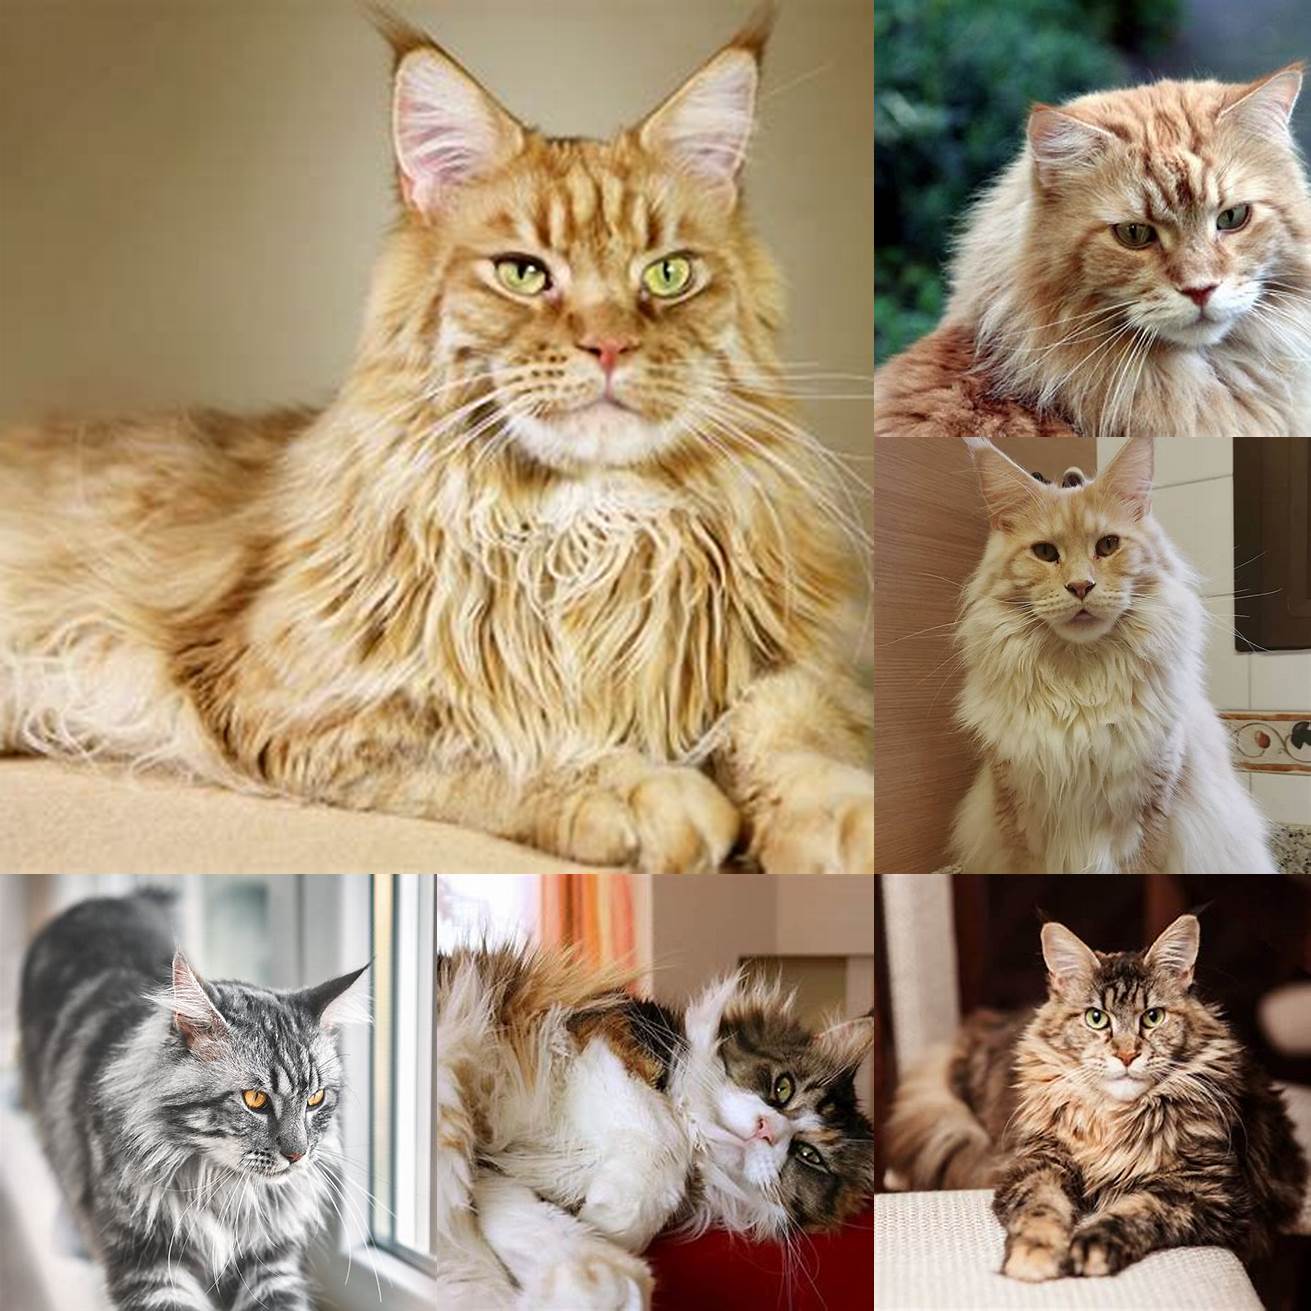 Maine Coon cats are known for their friendly and laid-back personalities